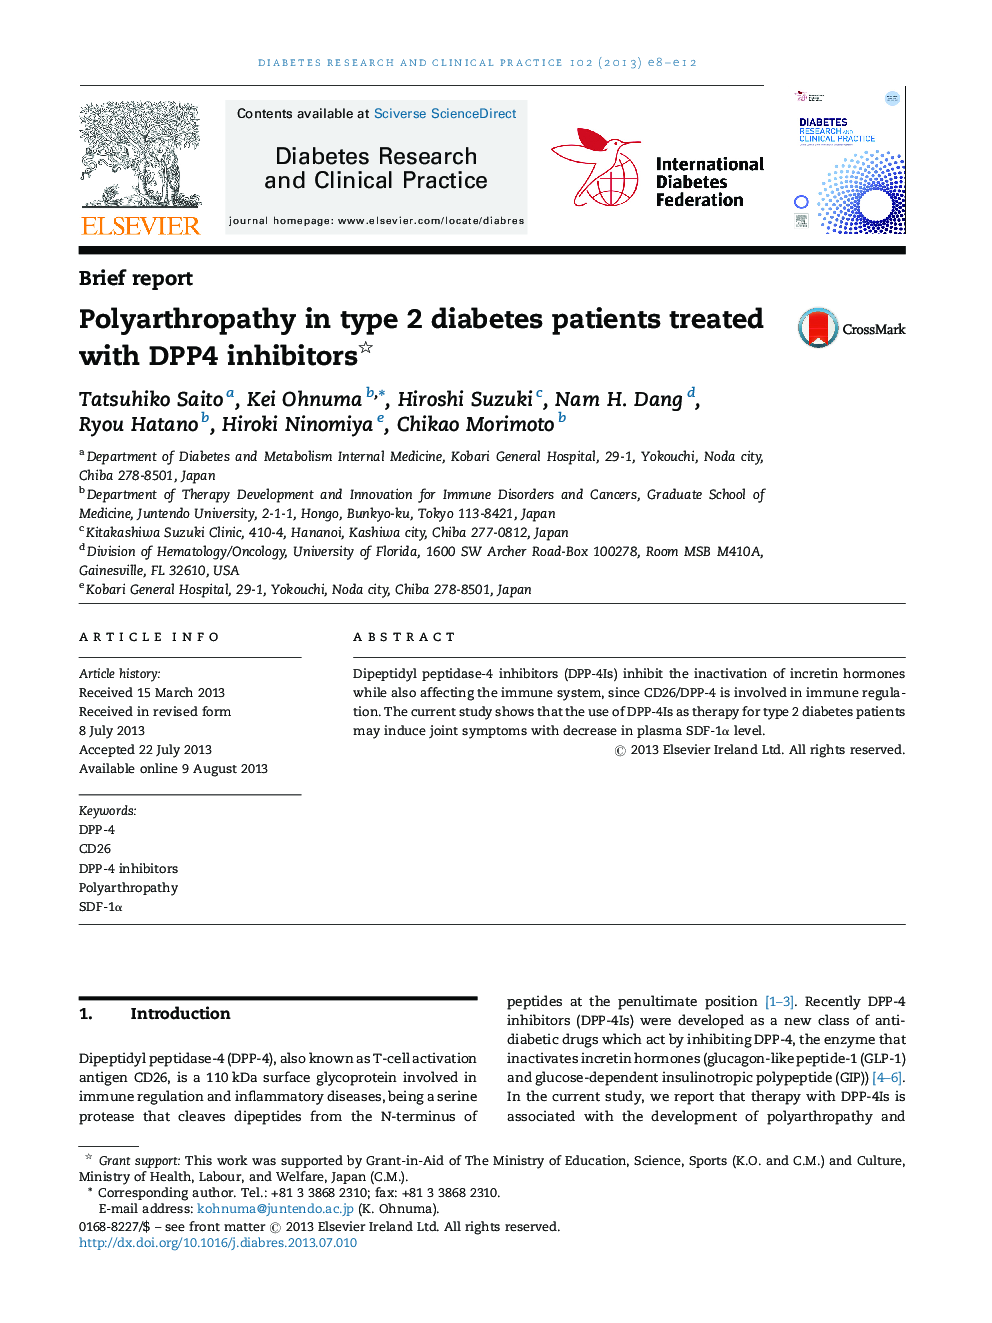 Polyarthropathy in type 2 diabetes patients treated with DPP4 inhibitors 